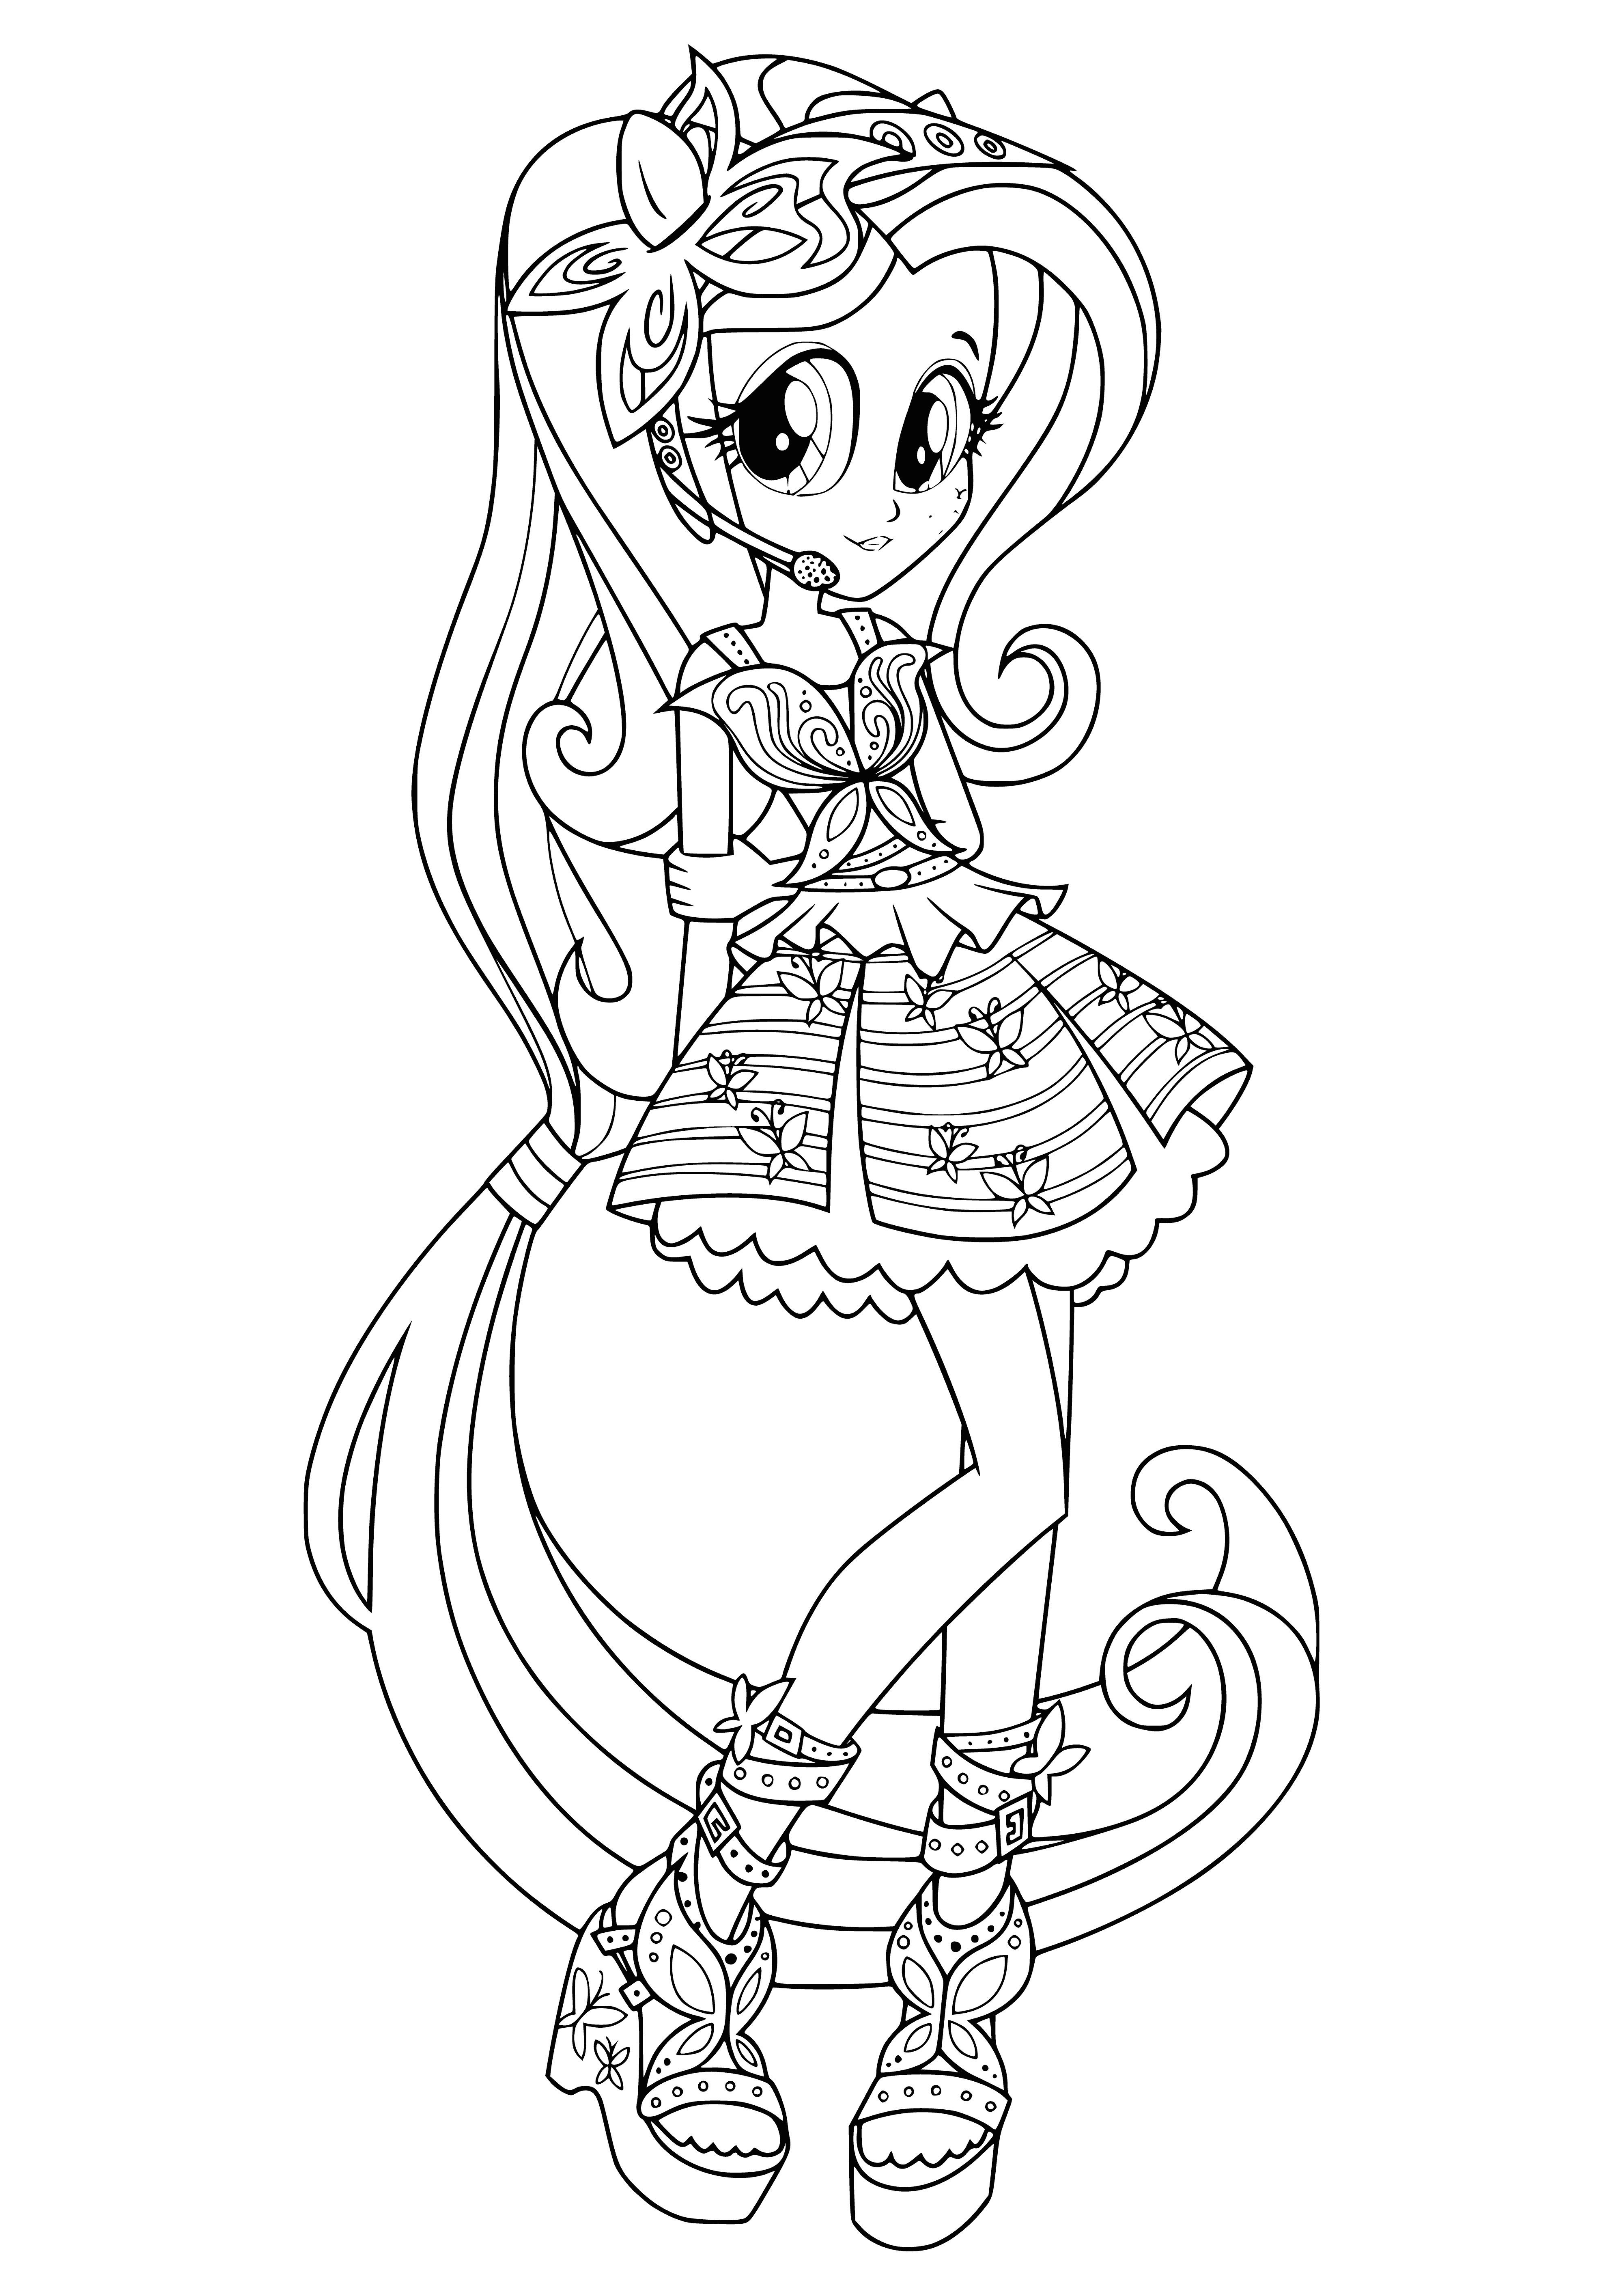 coloring page: Fluttershy is a pale yellow Pegasus with butterfly cutie mark, wearing a pink tank and lavender skirt, light blue headband with rainbow.